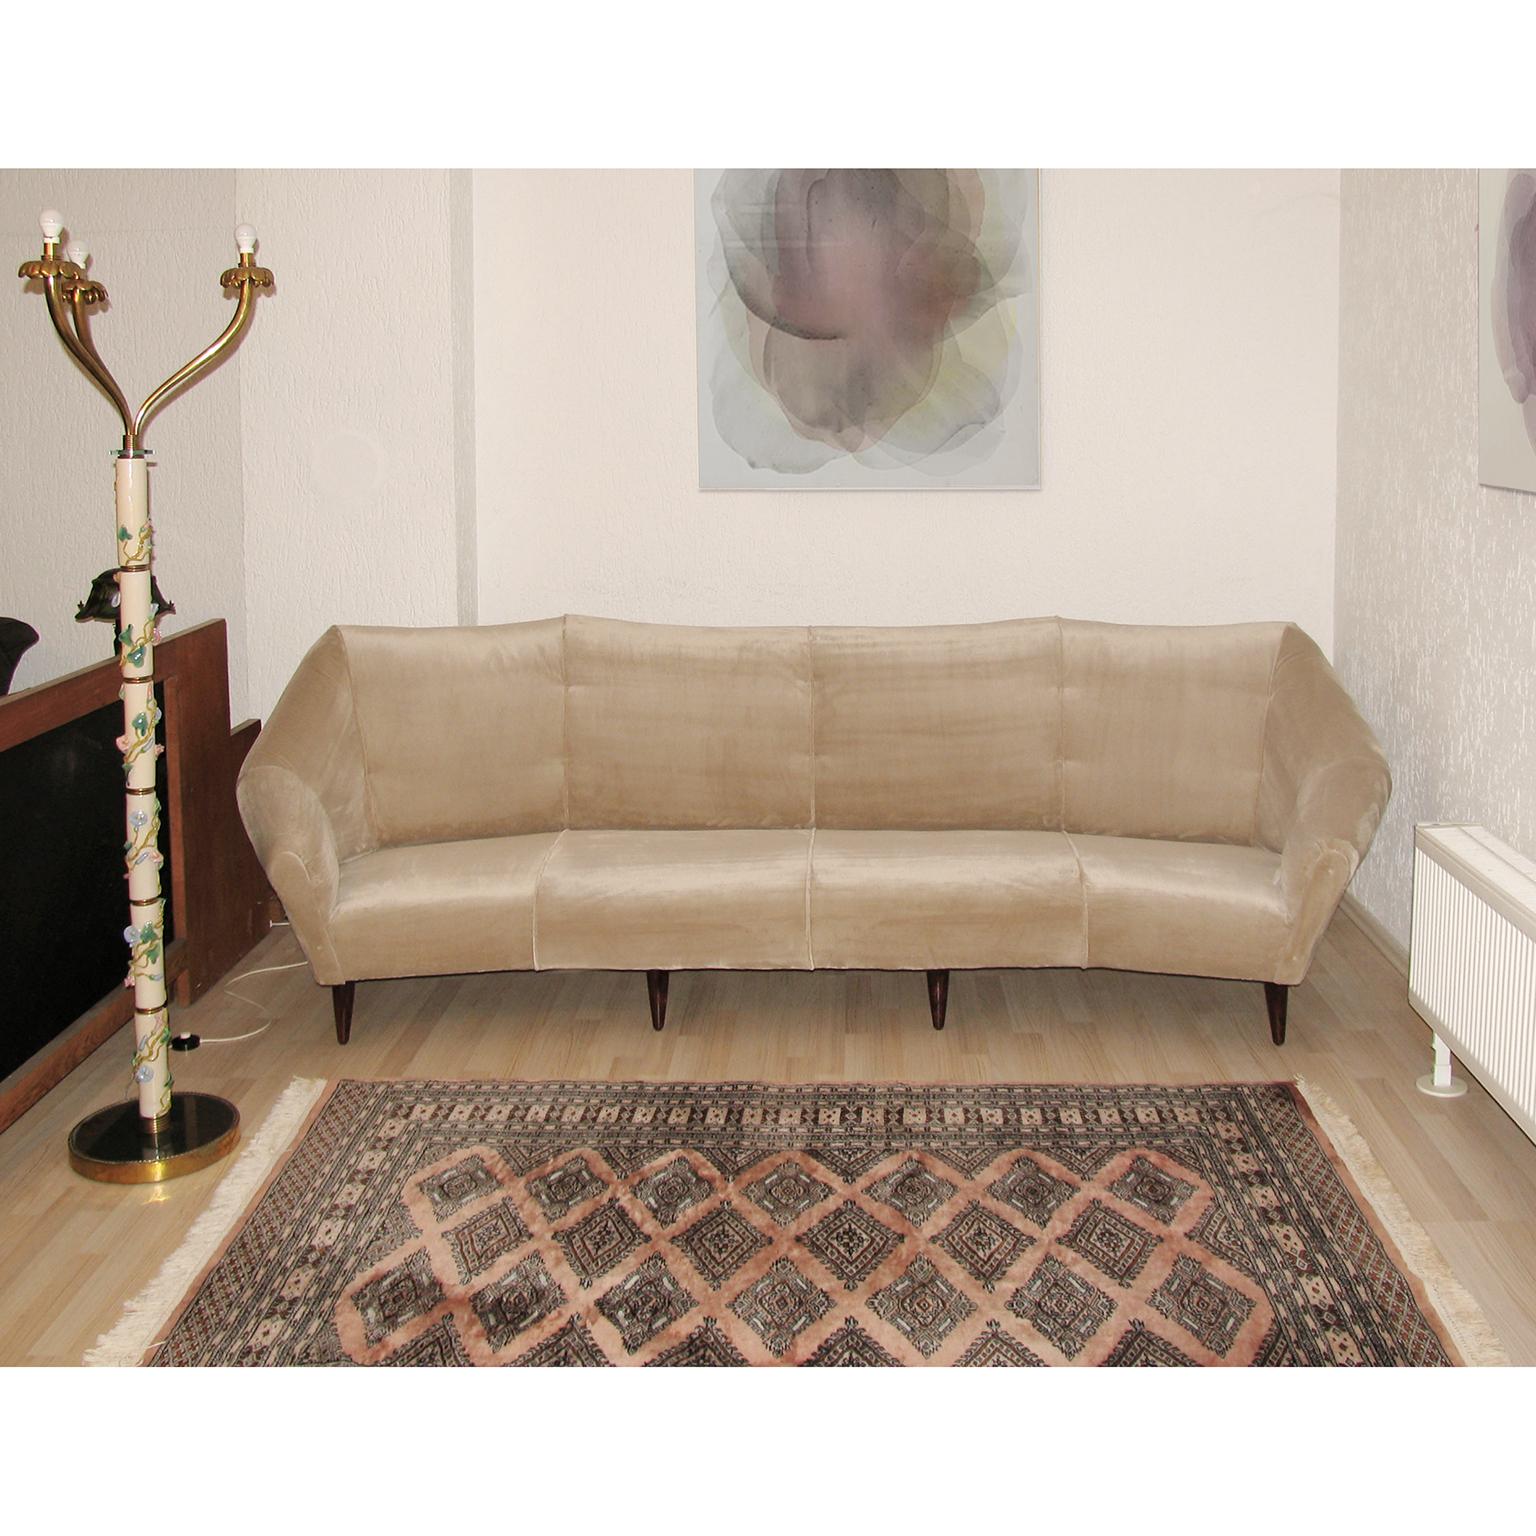 Large sofa, four seats, designed by Enzo Minotti, Mid-Century Modern, 1950s.
Wooden structure reupholstered in luxurious Rubelli velvet. Wood feet.
Angular shaped design, with comfortable arms.
Dimensions:
Width 285 cm (9 ft and 4.21 inches),